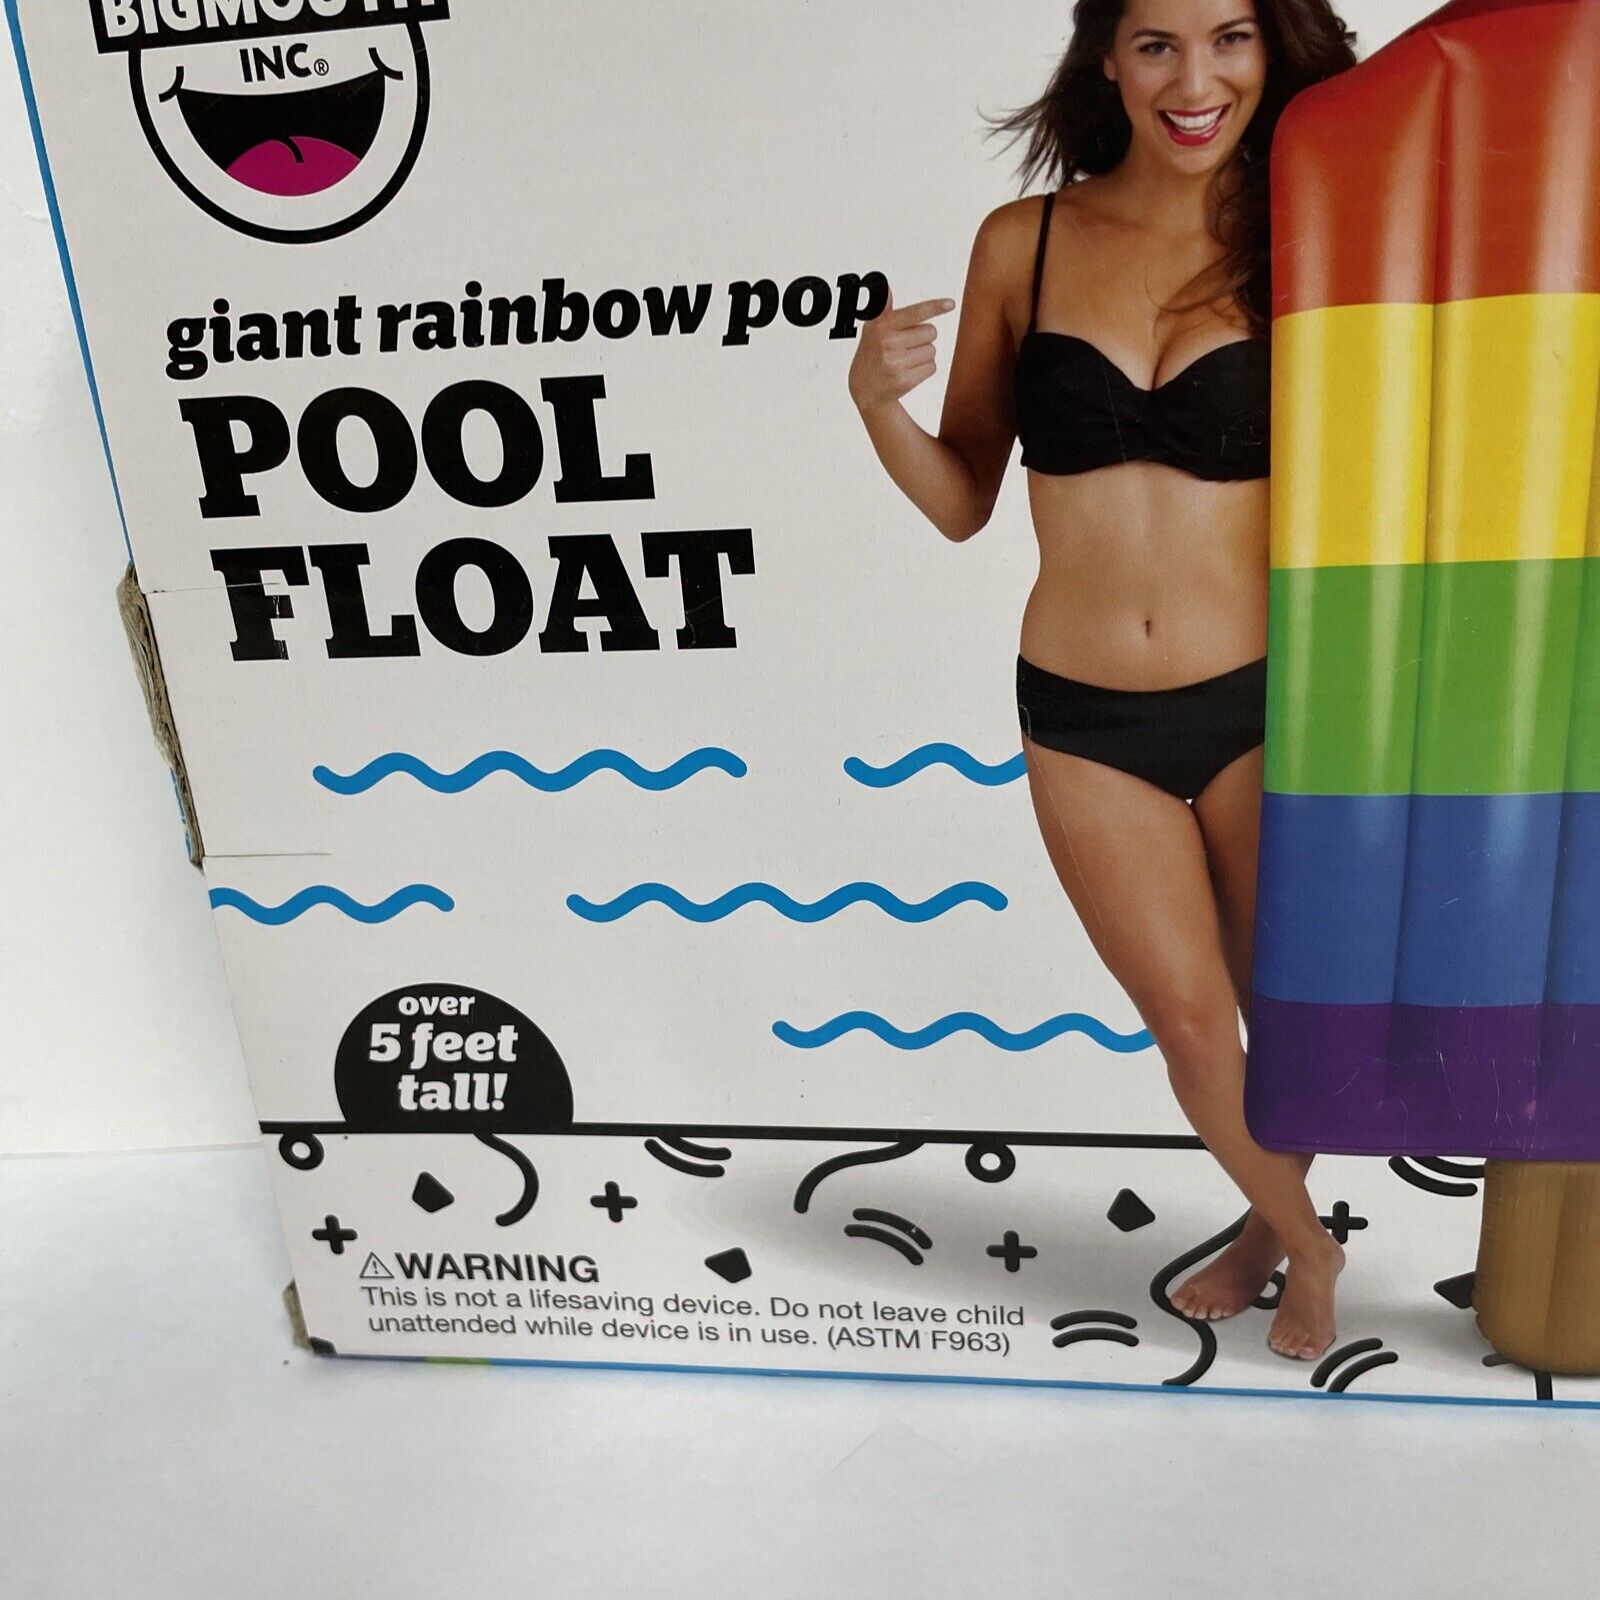 NEW Giant Rainbow Popsicle POOL FLOAT Over 5 Feet Tall 68 x 30 x 7.5 BIGMOUTH V2